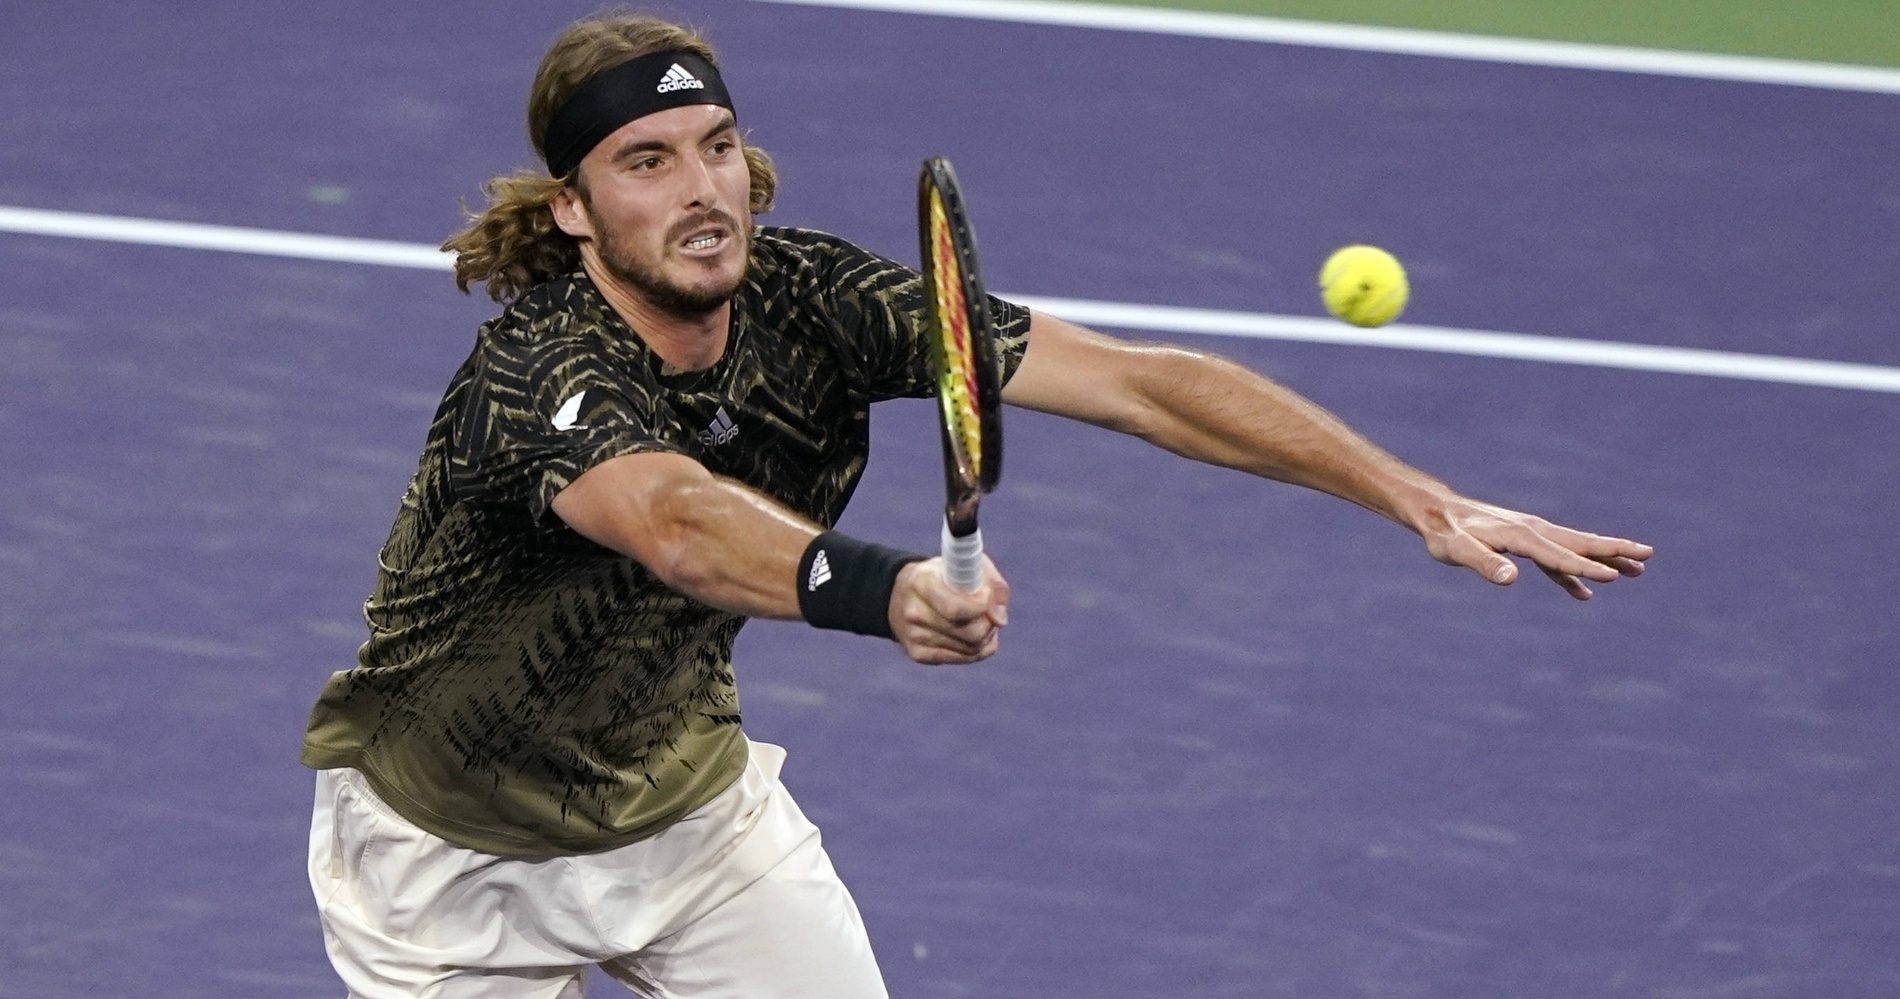 Elbow injury forces Tsitsipas to retire after six games with Popyrin in